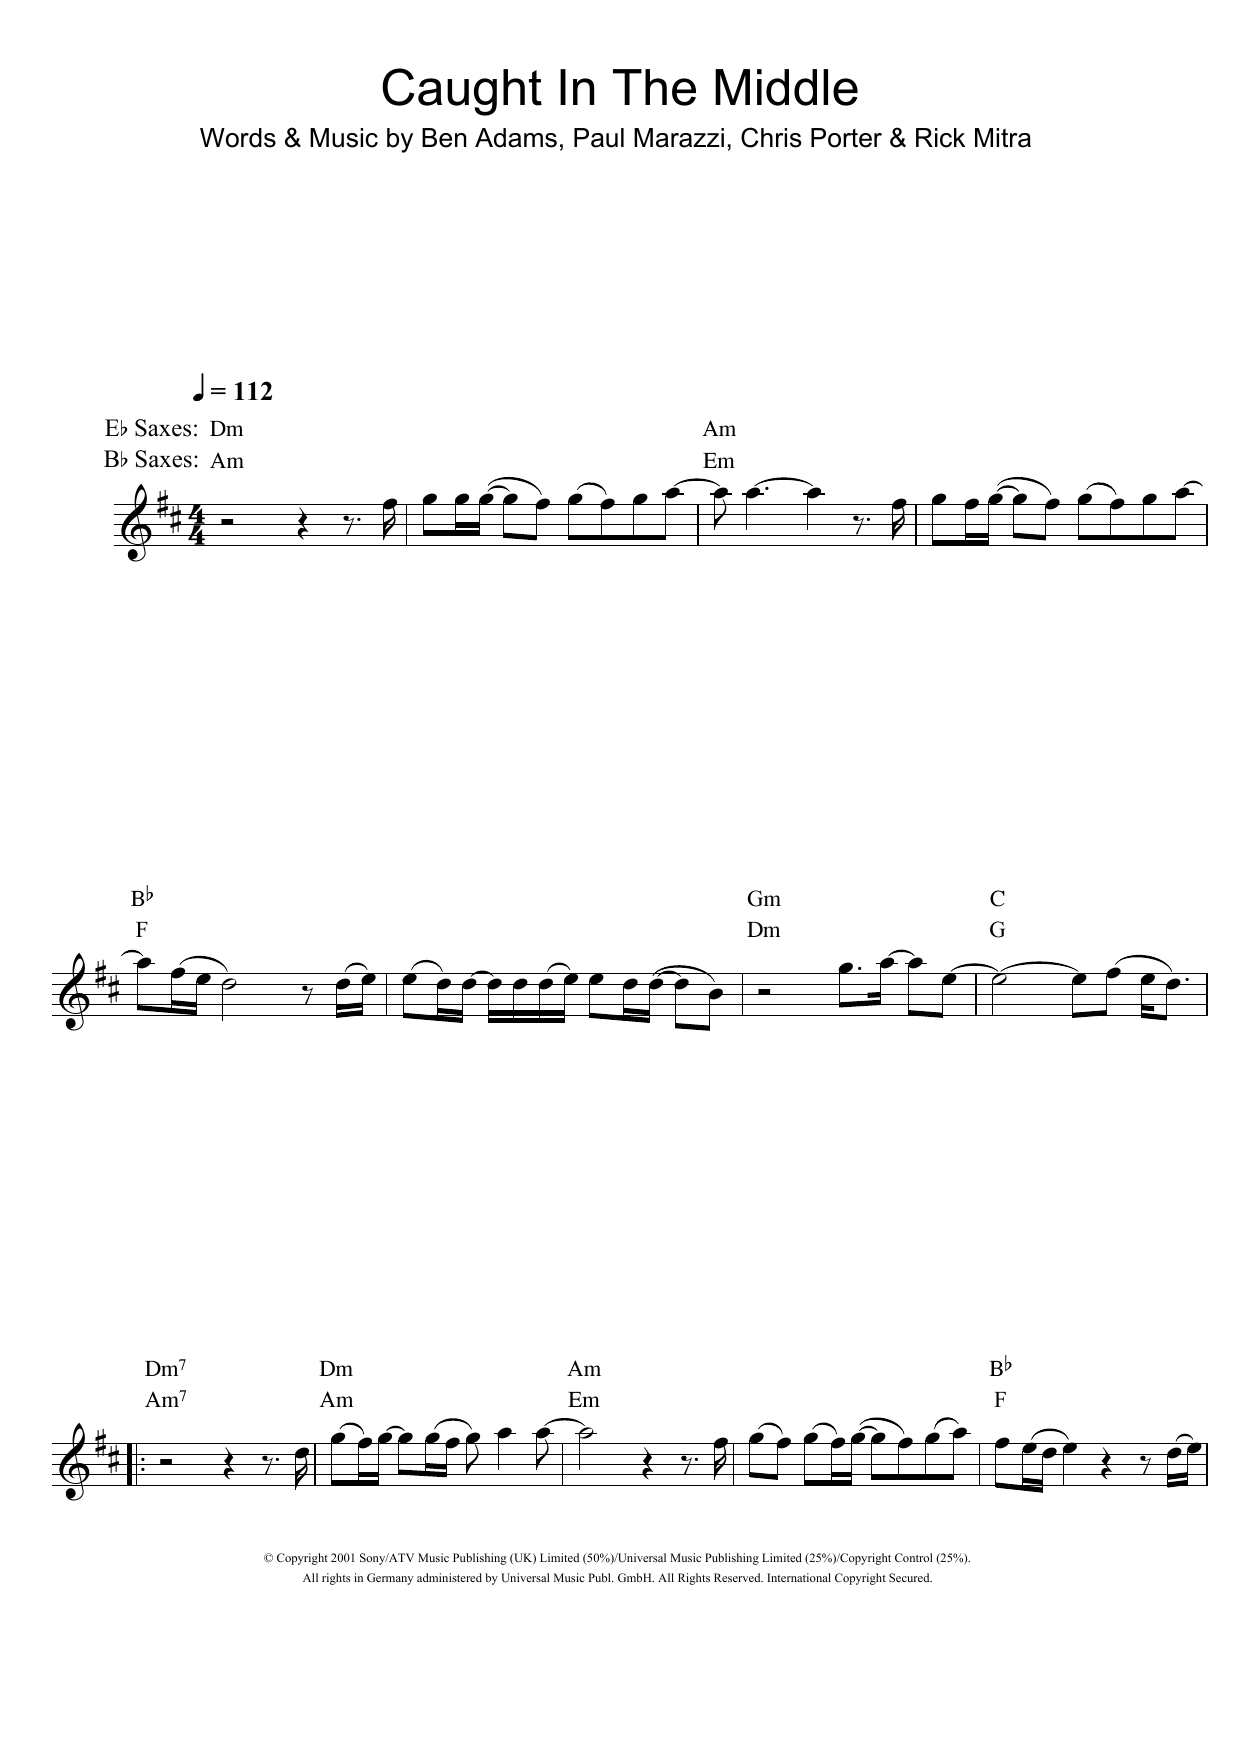 Download A1 Caught In The Middle Sheet Music